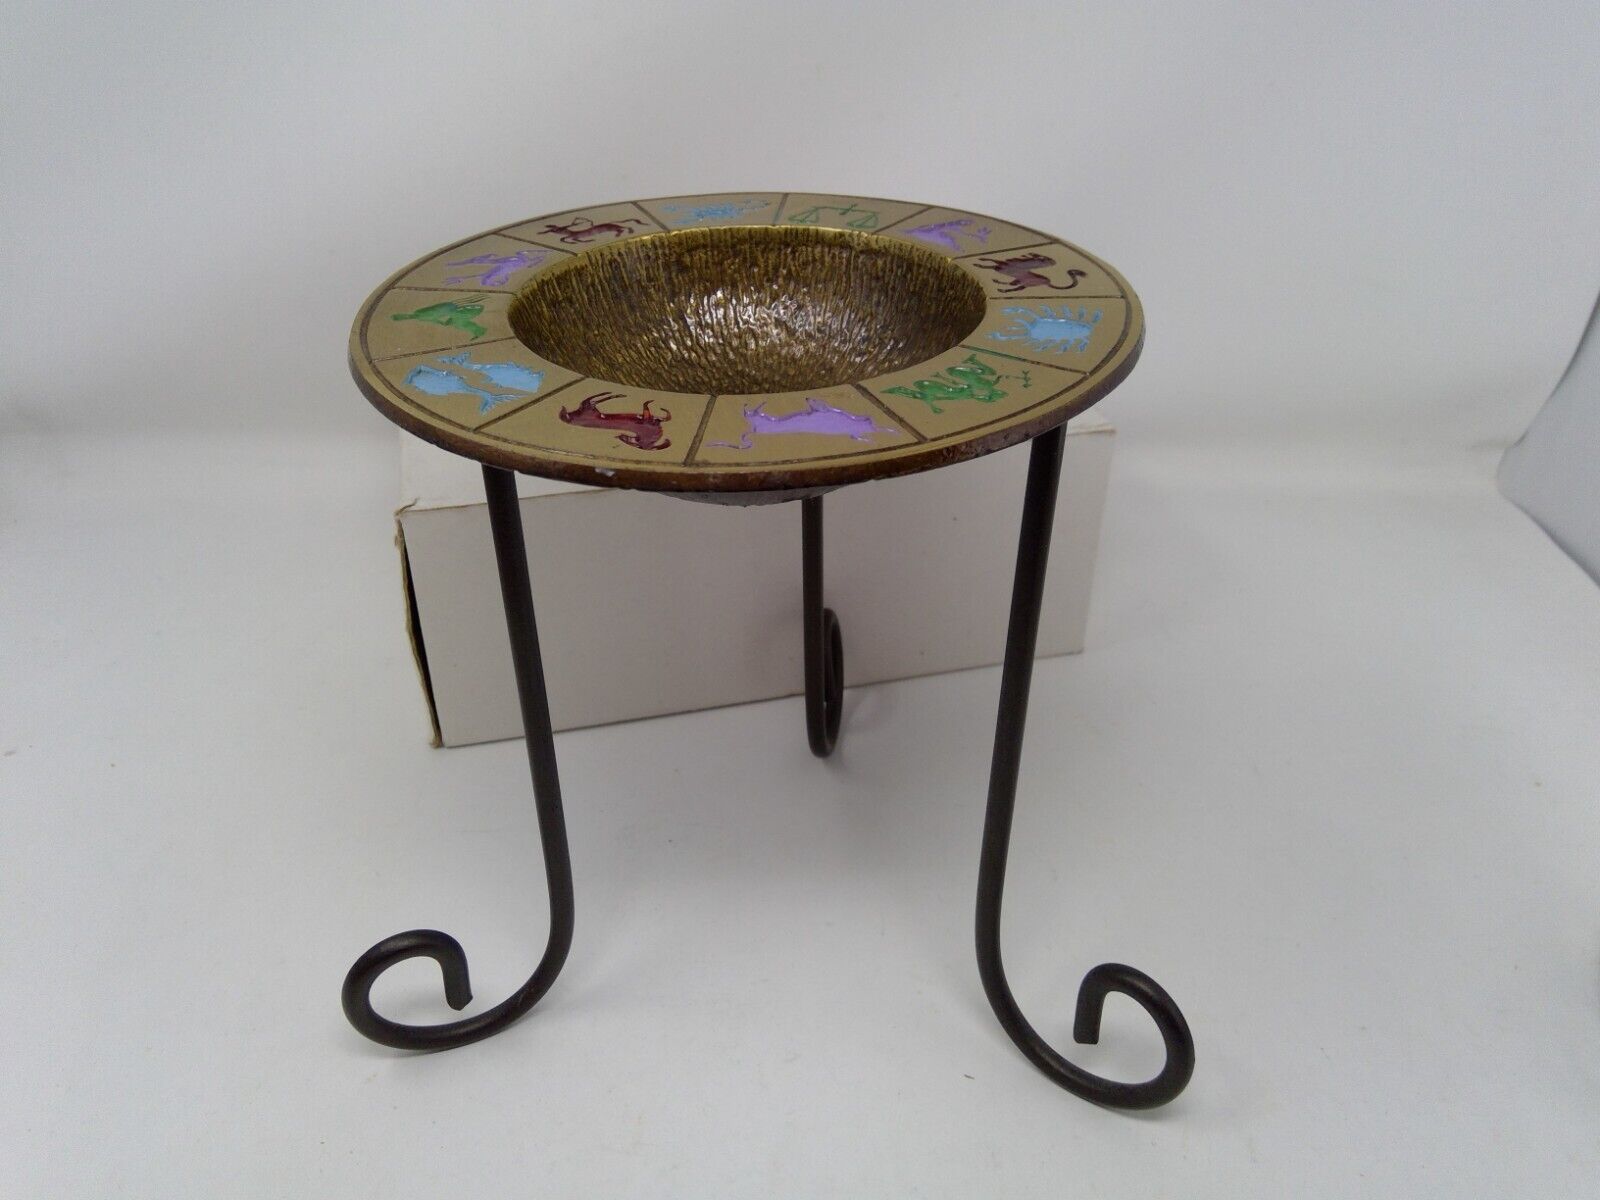 Made in Israel Hen-Holon Brass Zodiac Bowl Candleholder w/ Wrought Iron Stand